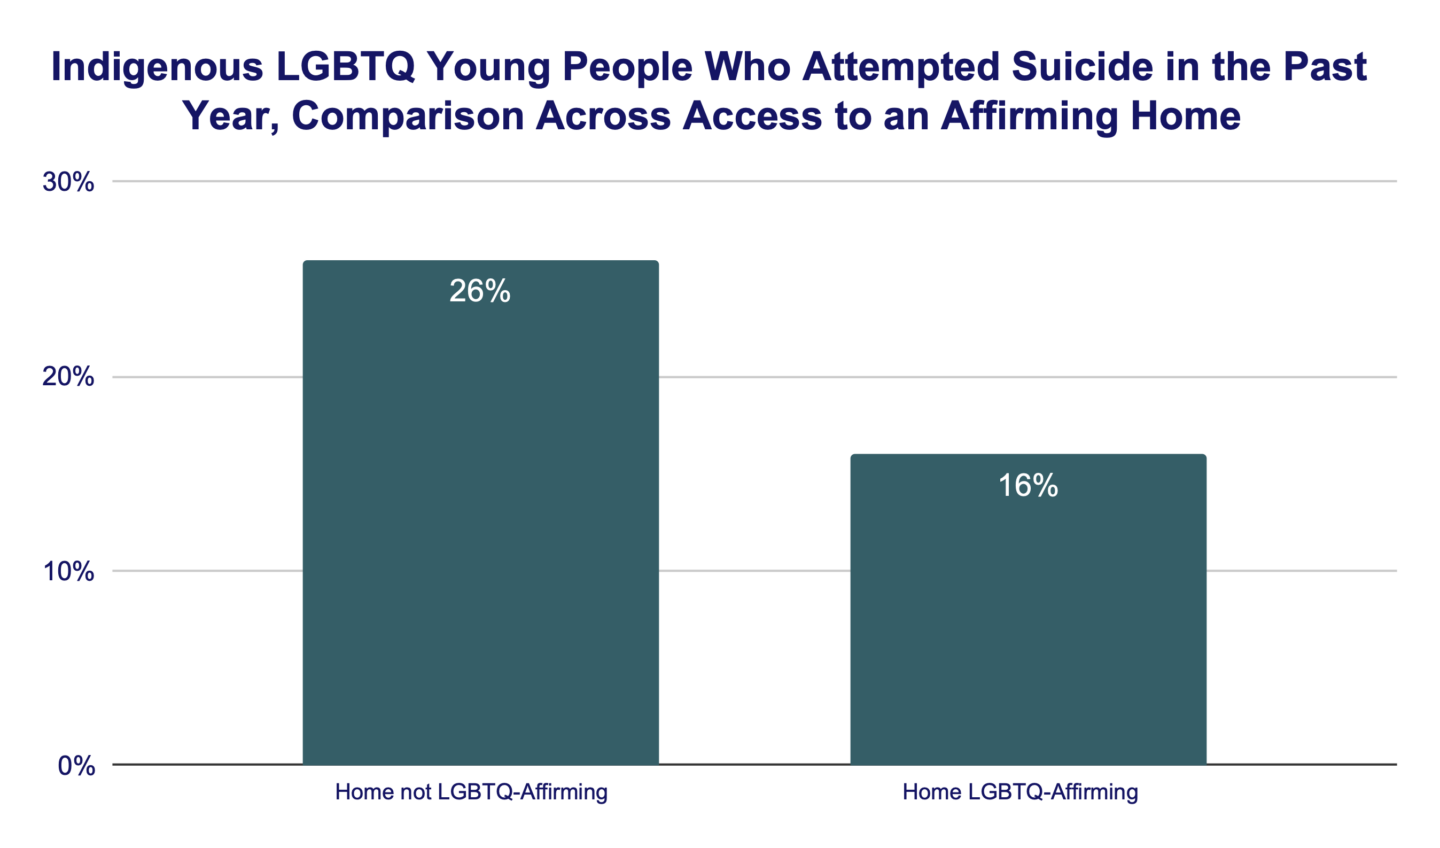 Indigenous LGBTQ Young People Who Attempted Suicide in the Past Year Comparison Across Access to an Affirming Home